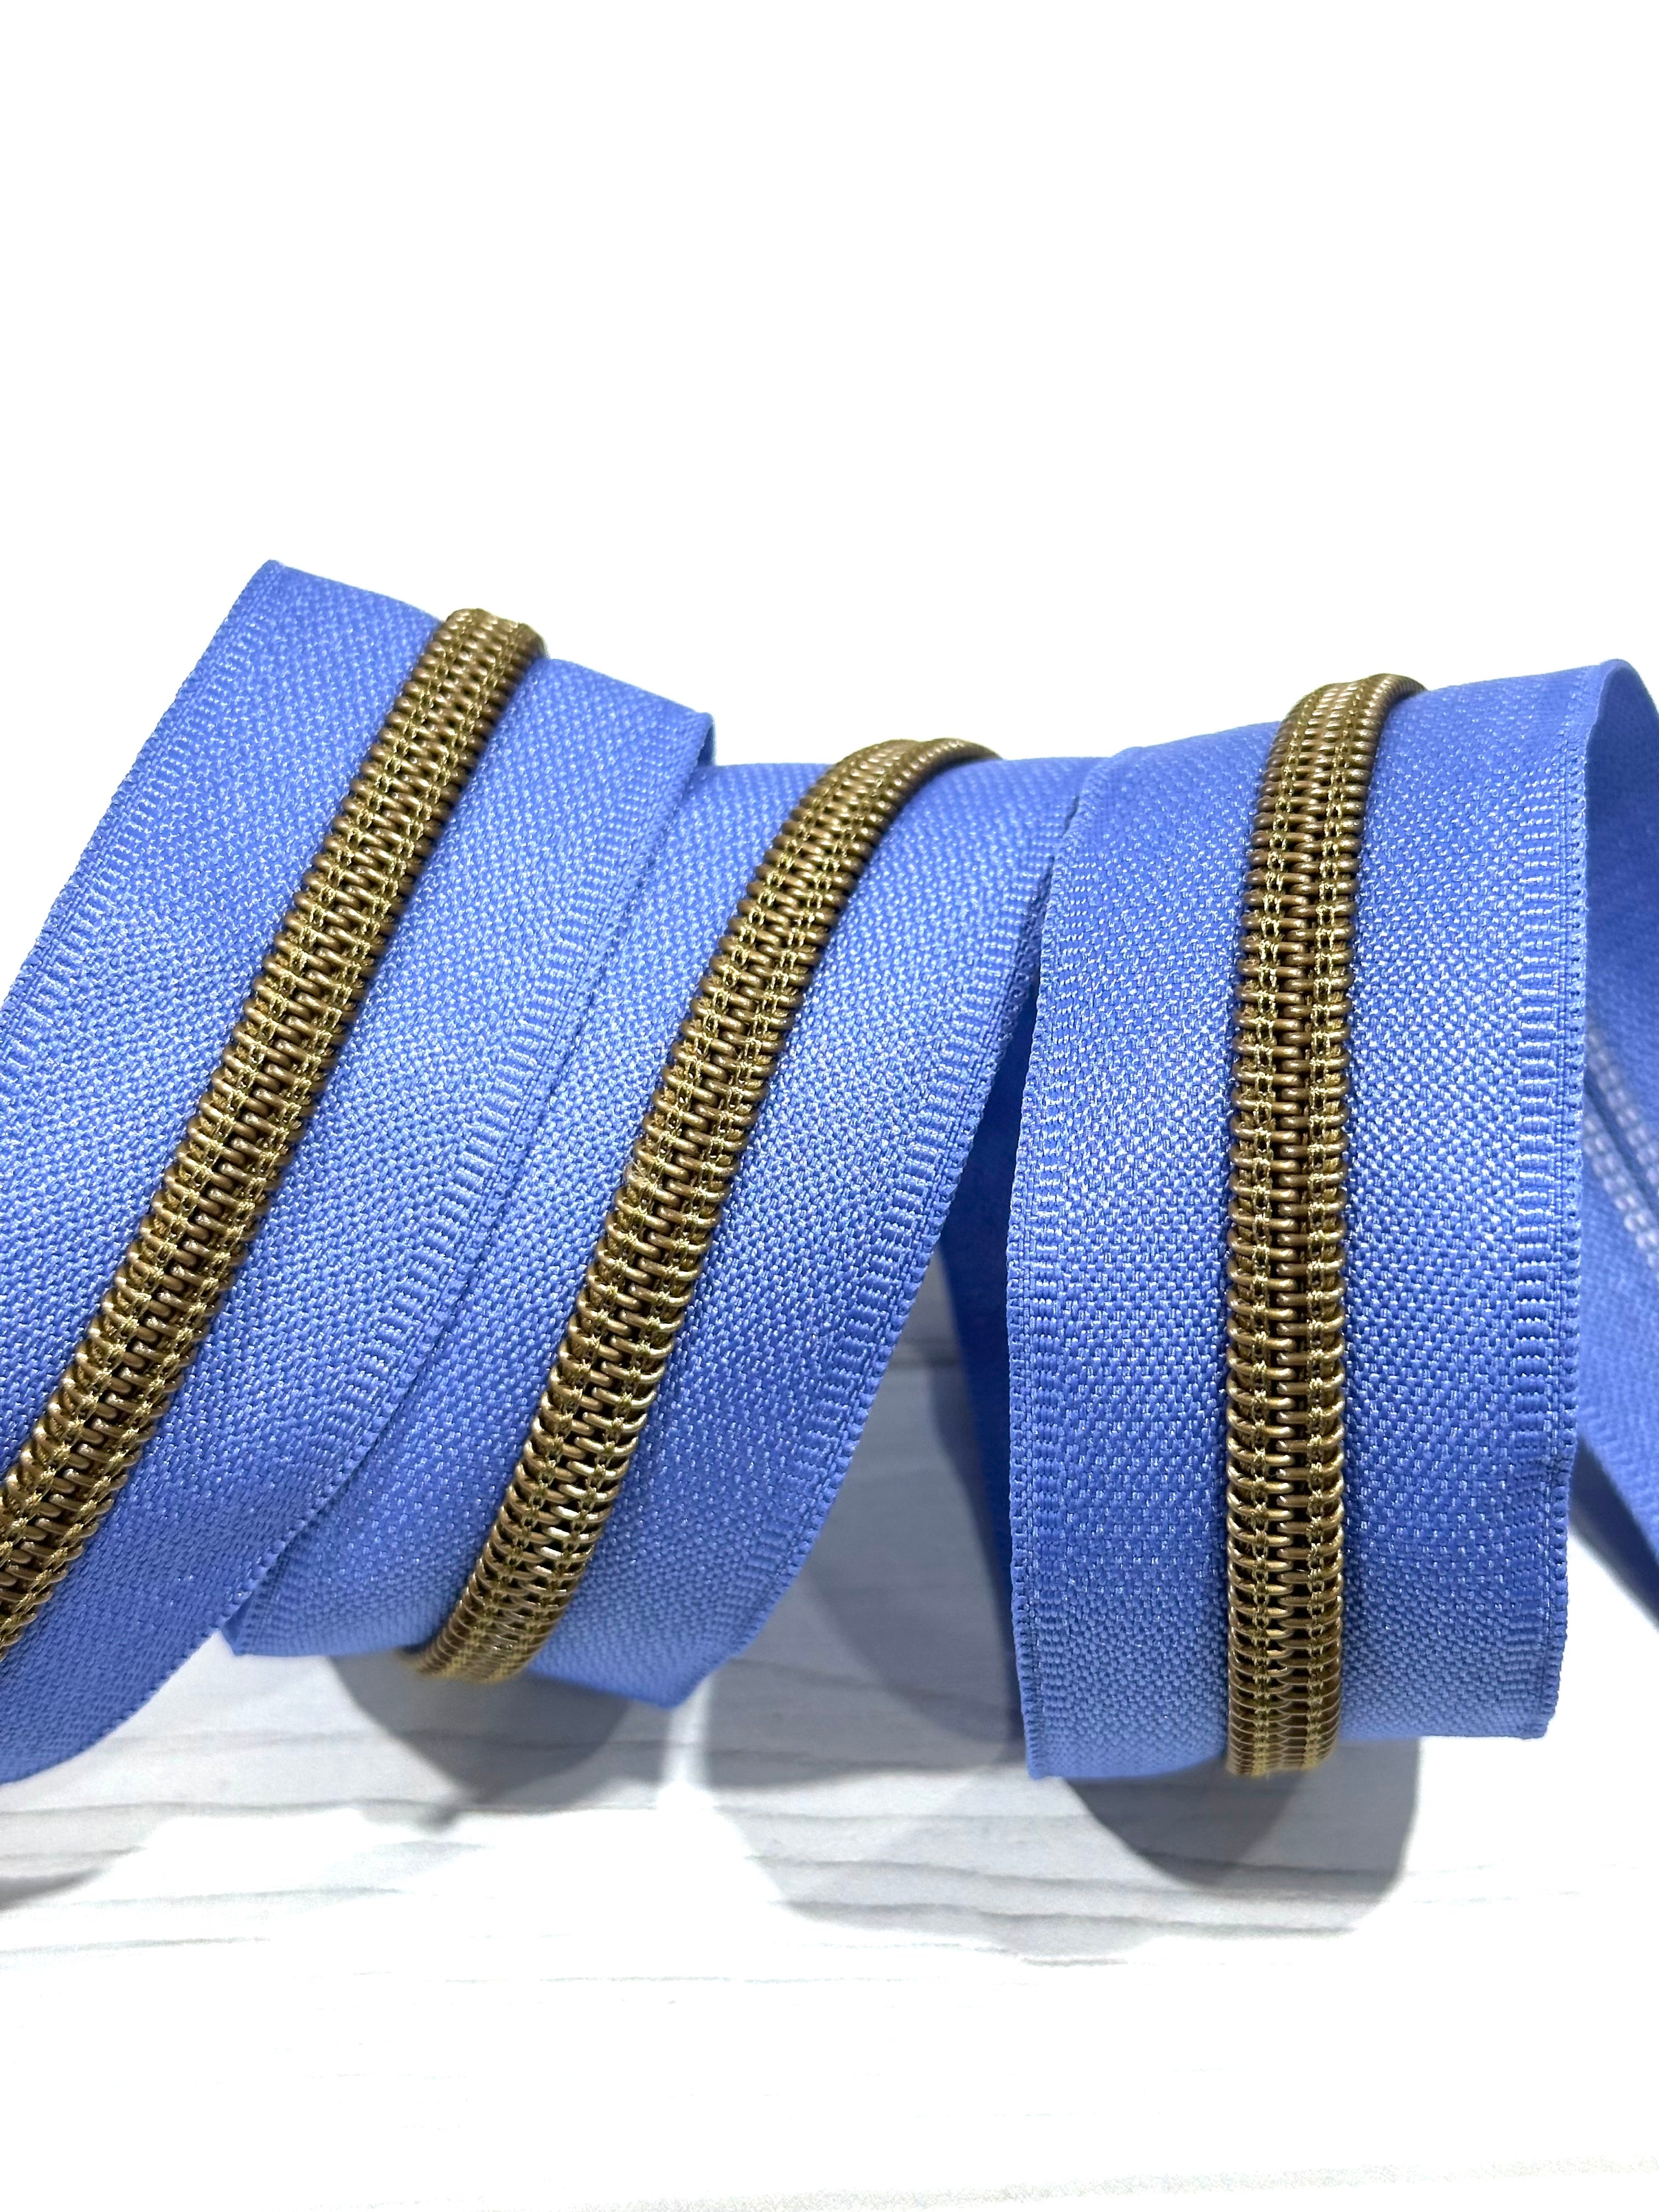 Periwinkle zipper tape with antique bronze teeth